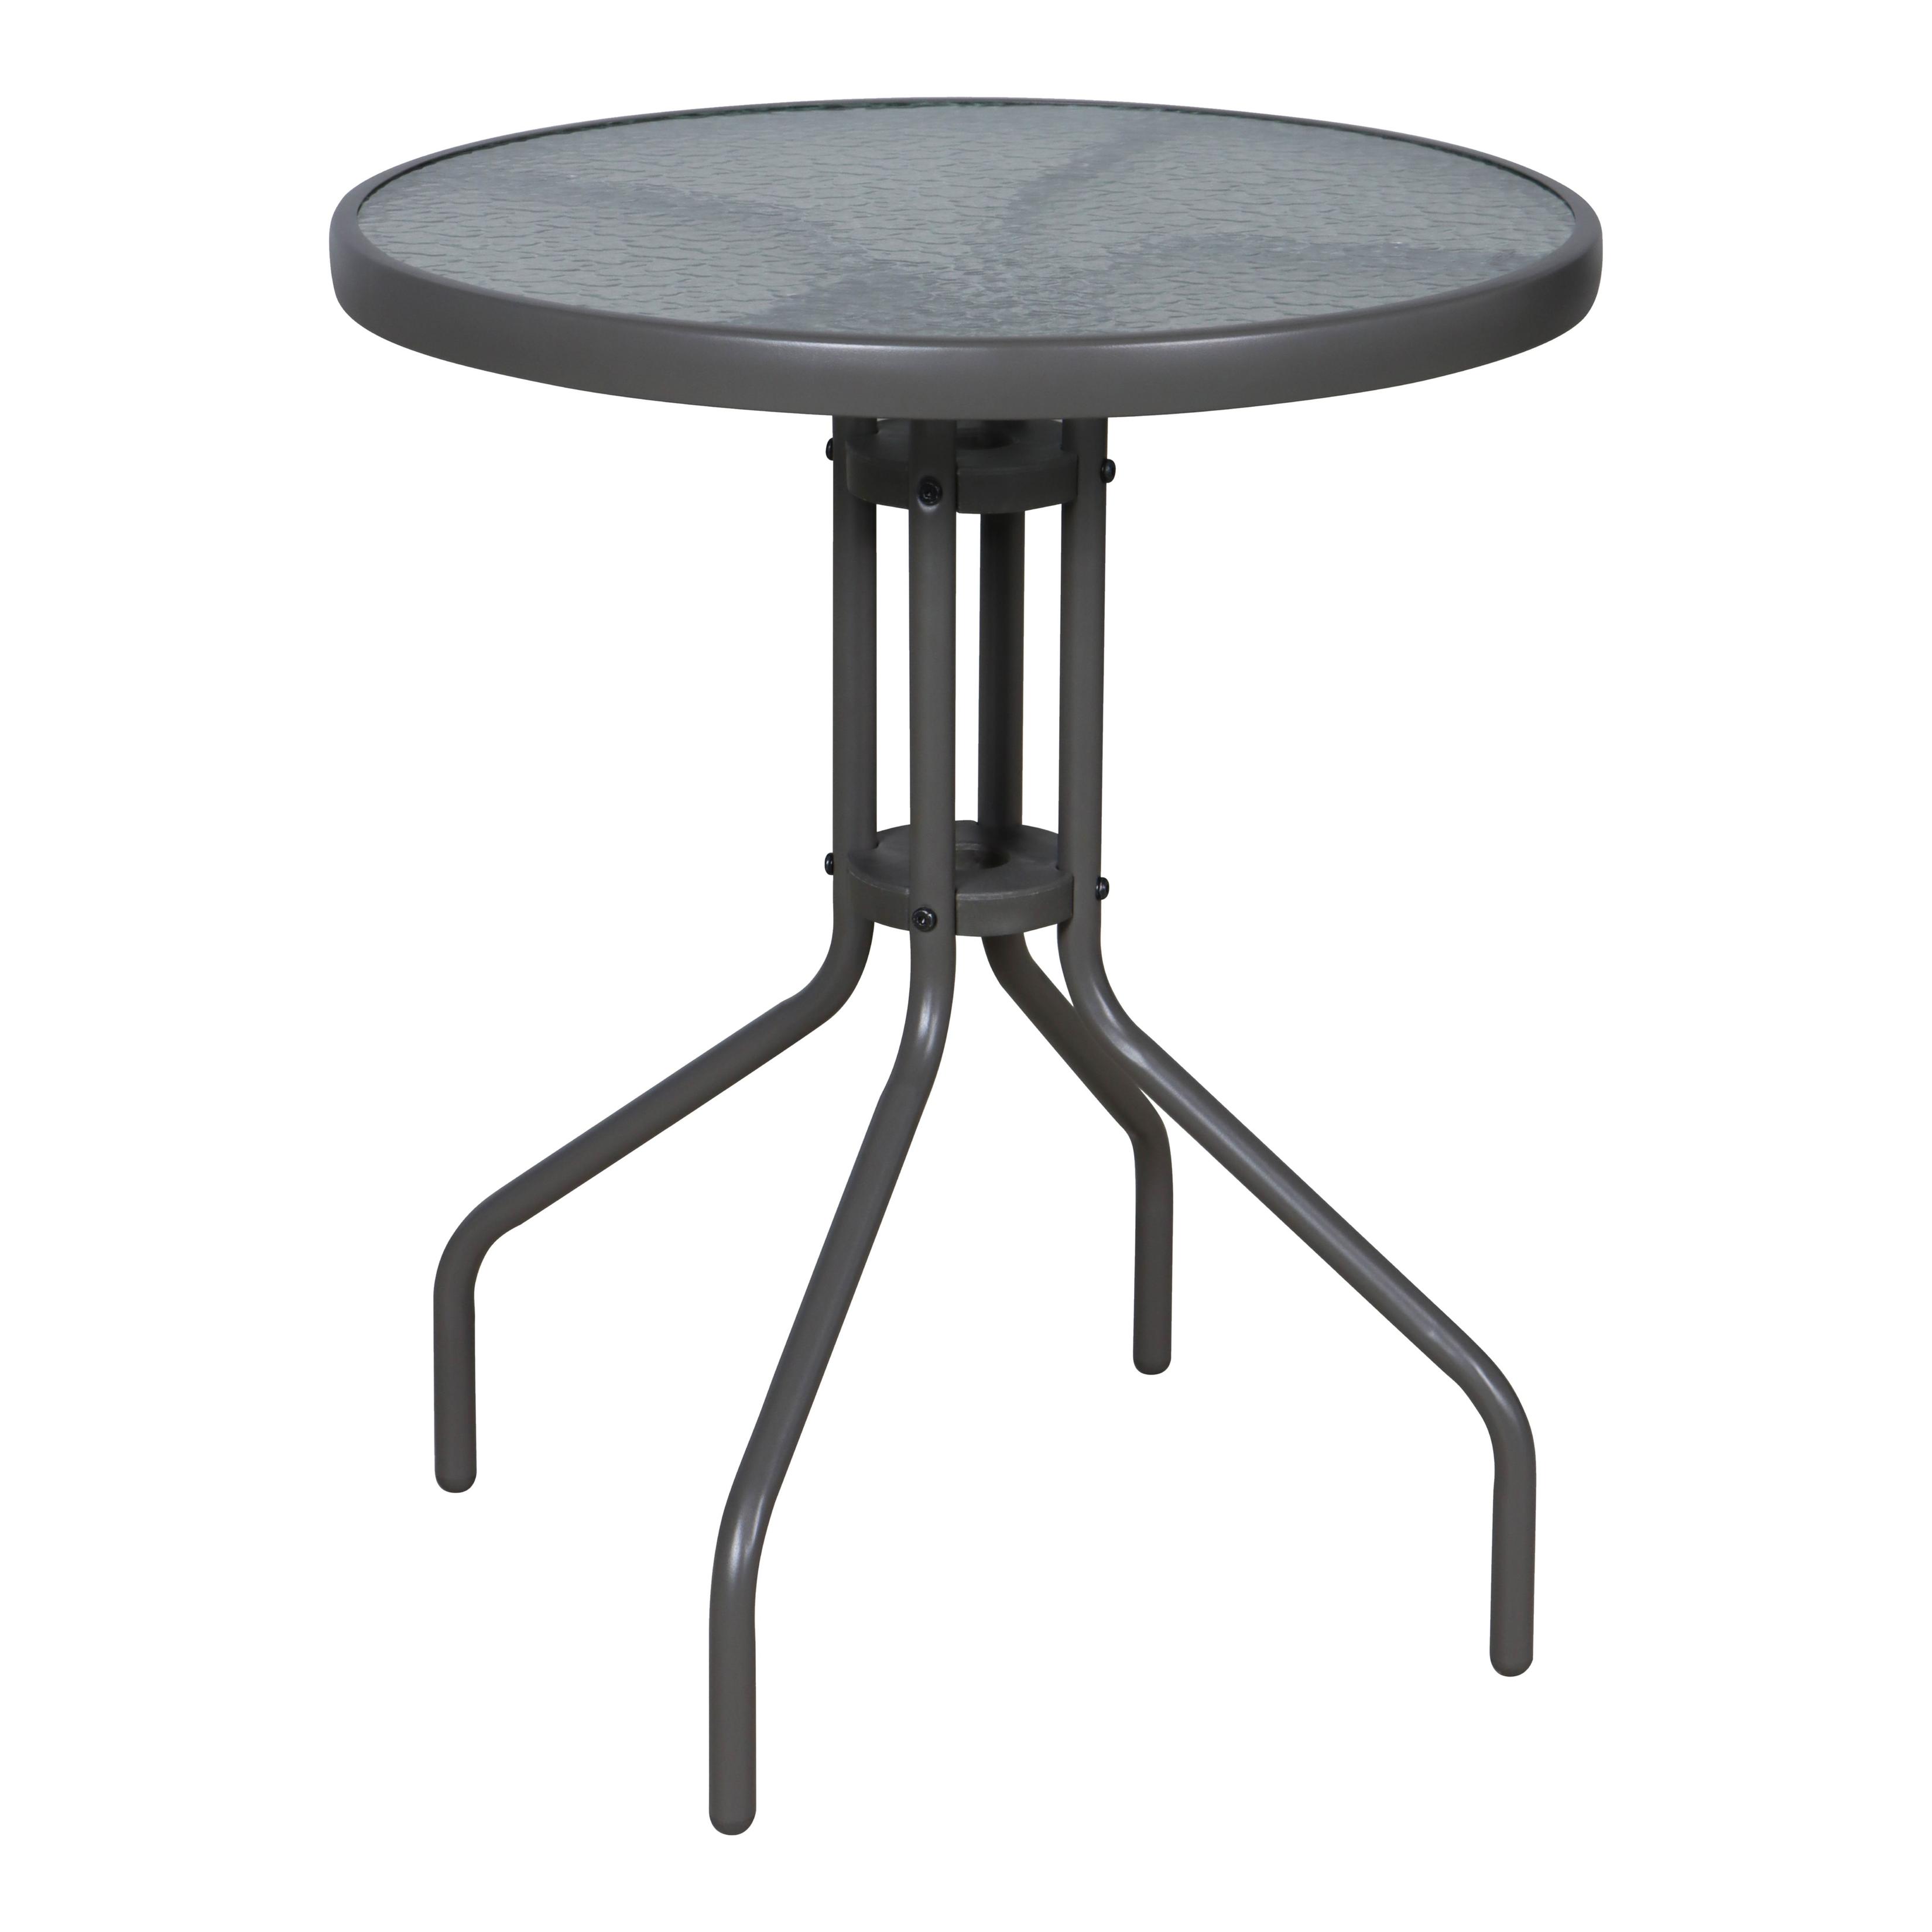 GoodHome Bari Brown 2 seater Round Bistro table with Tempered Glass Tabletop offers at £20 in B&Q